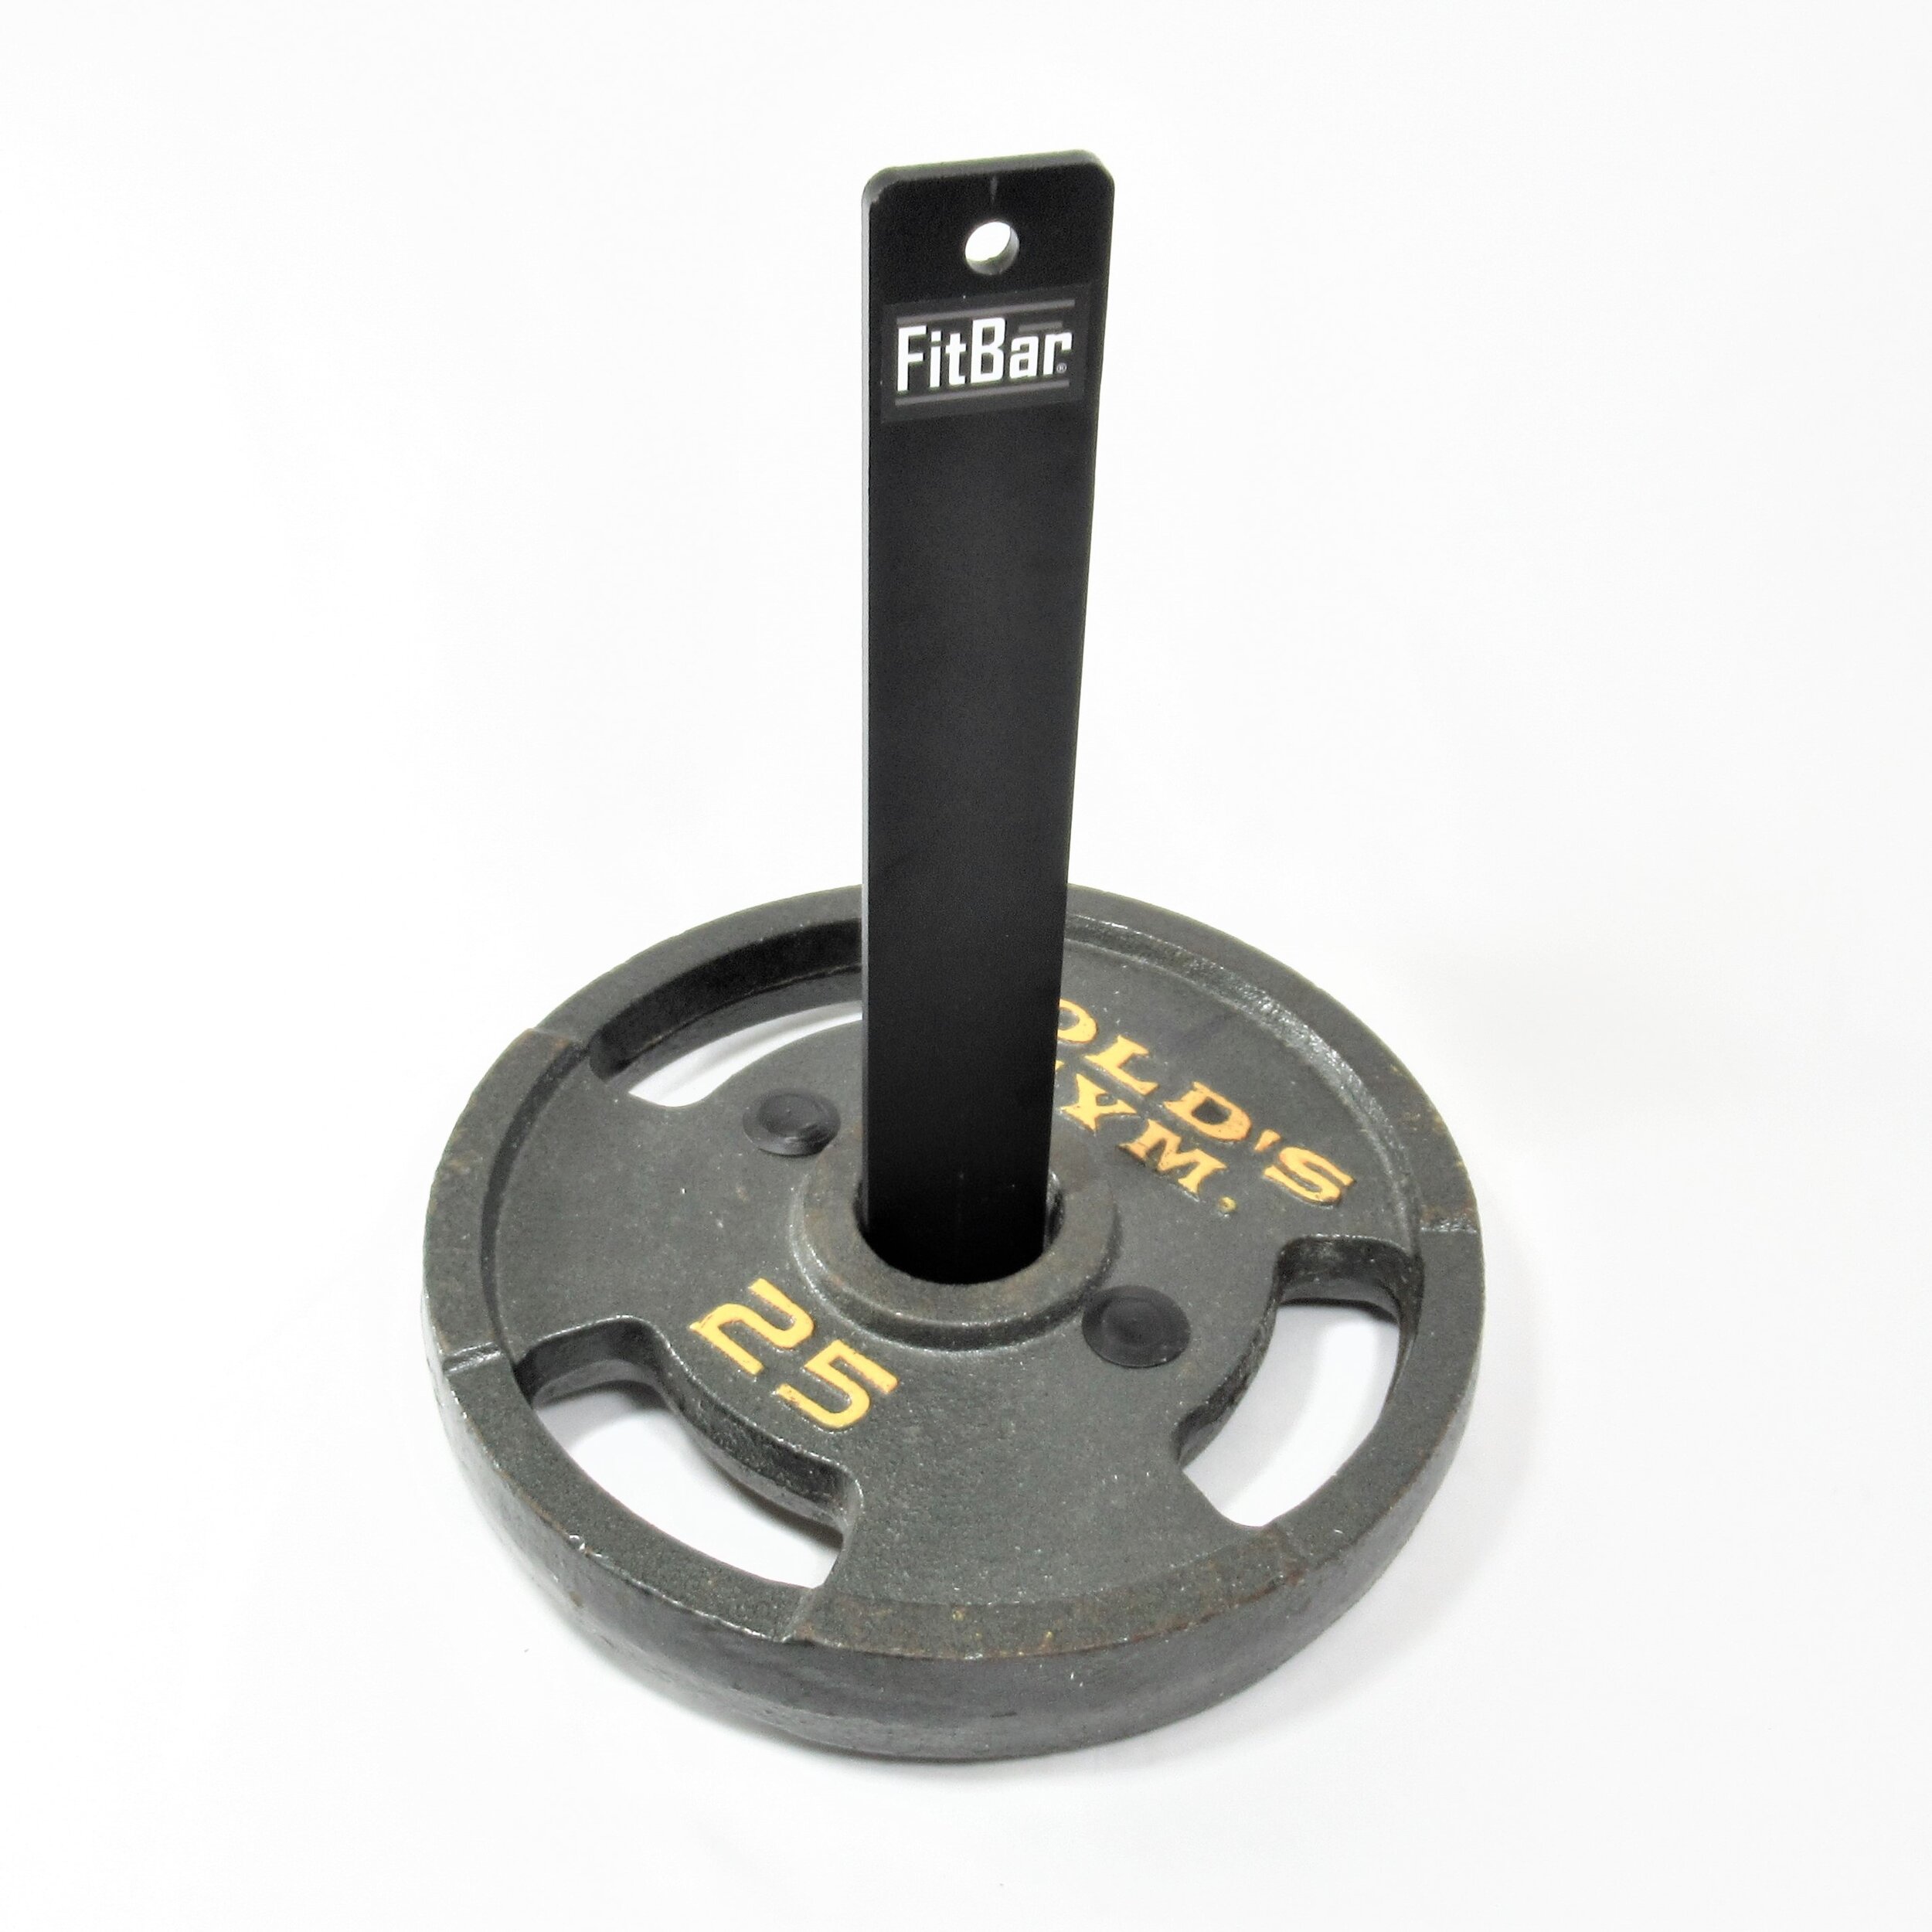 IronMind 15" Olympic Plate Loading Pin for sale online 